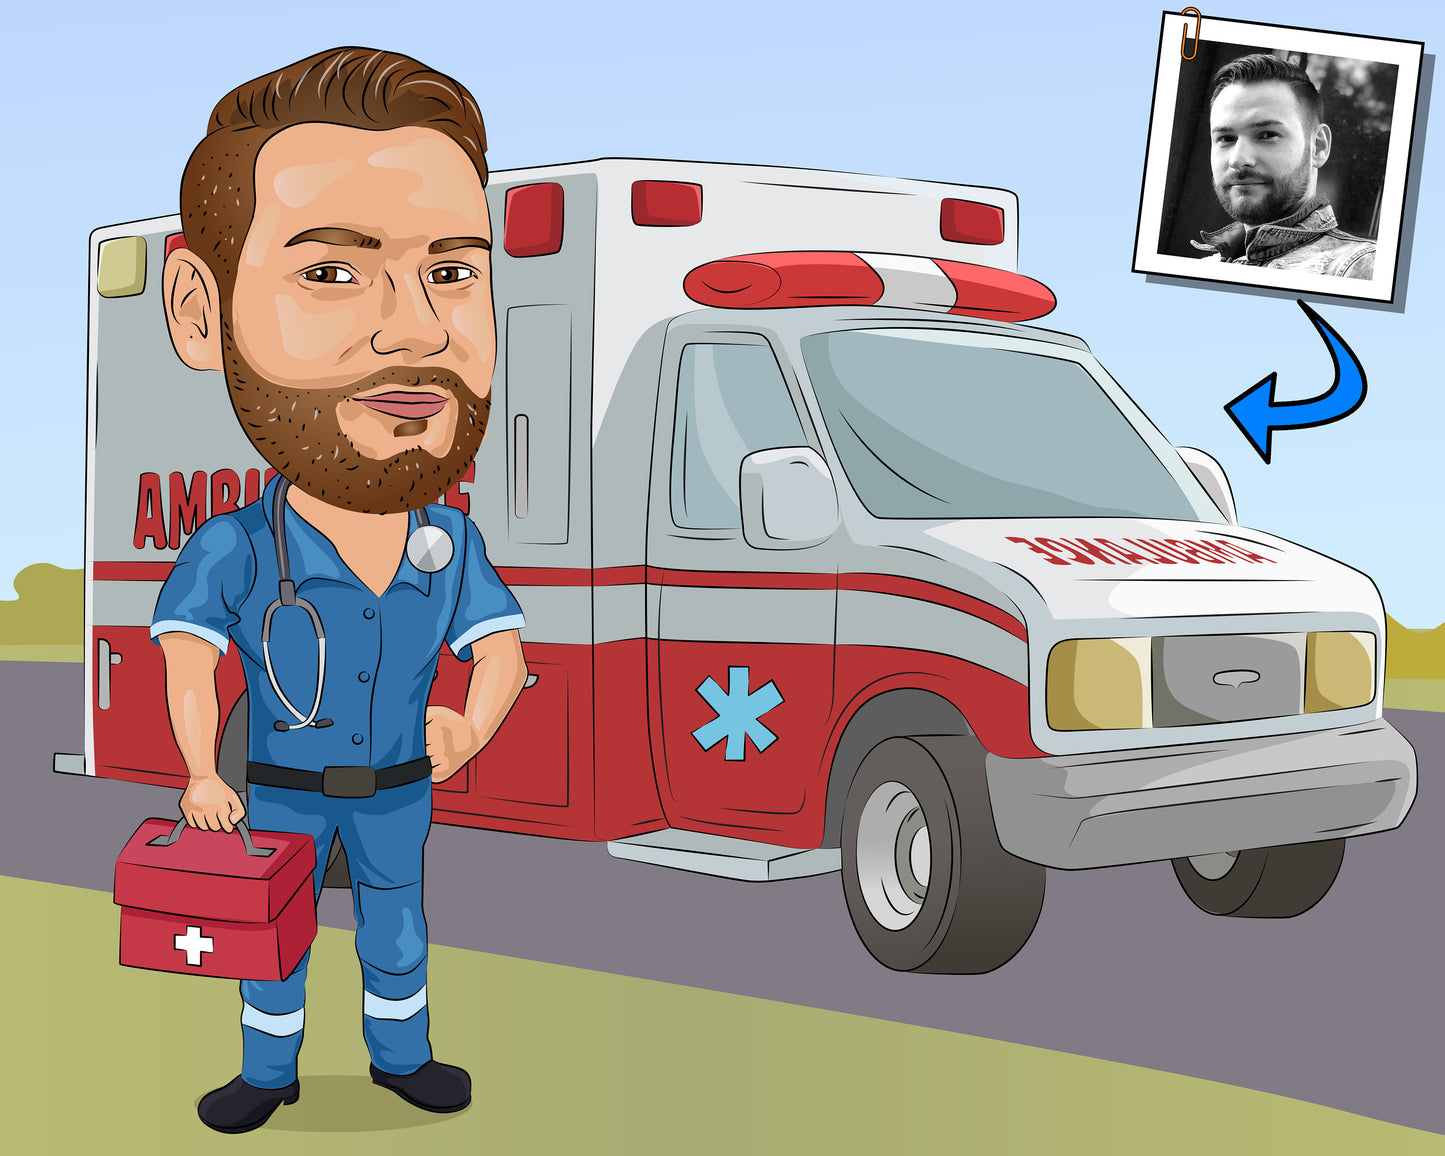 Paramedic Gift - Custom Caricature Portrait From Your Photo